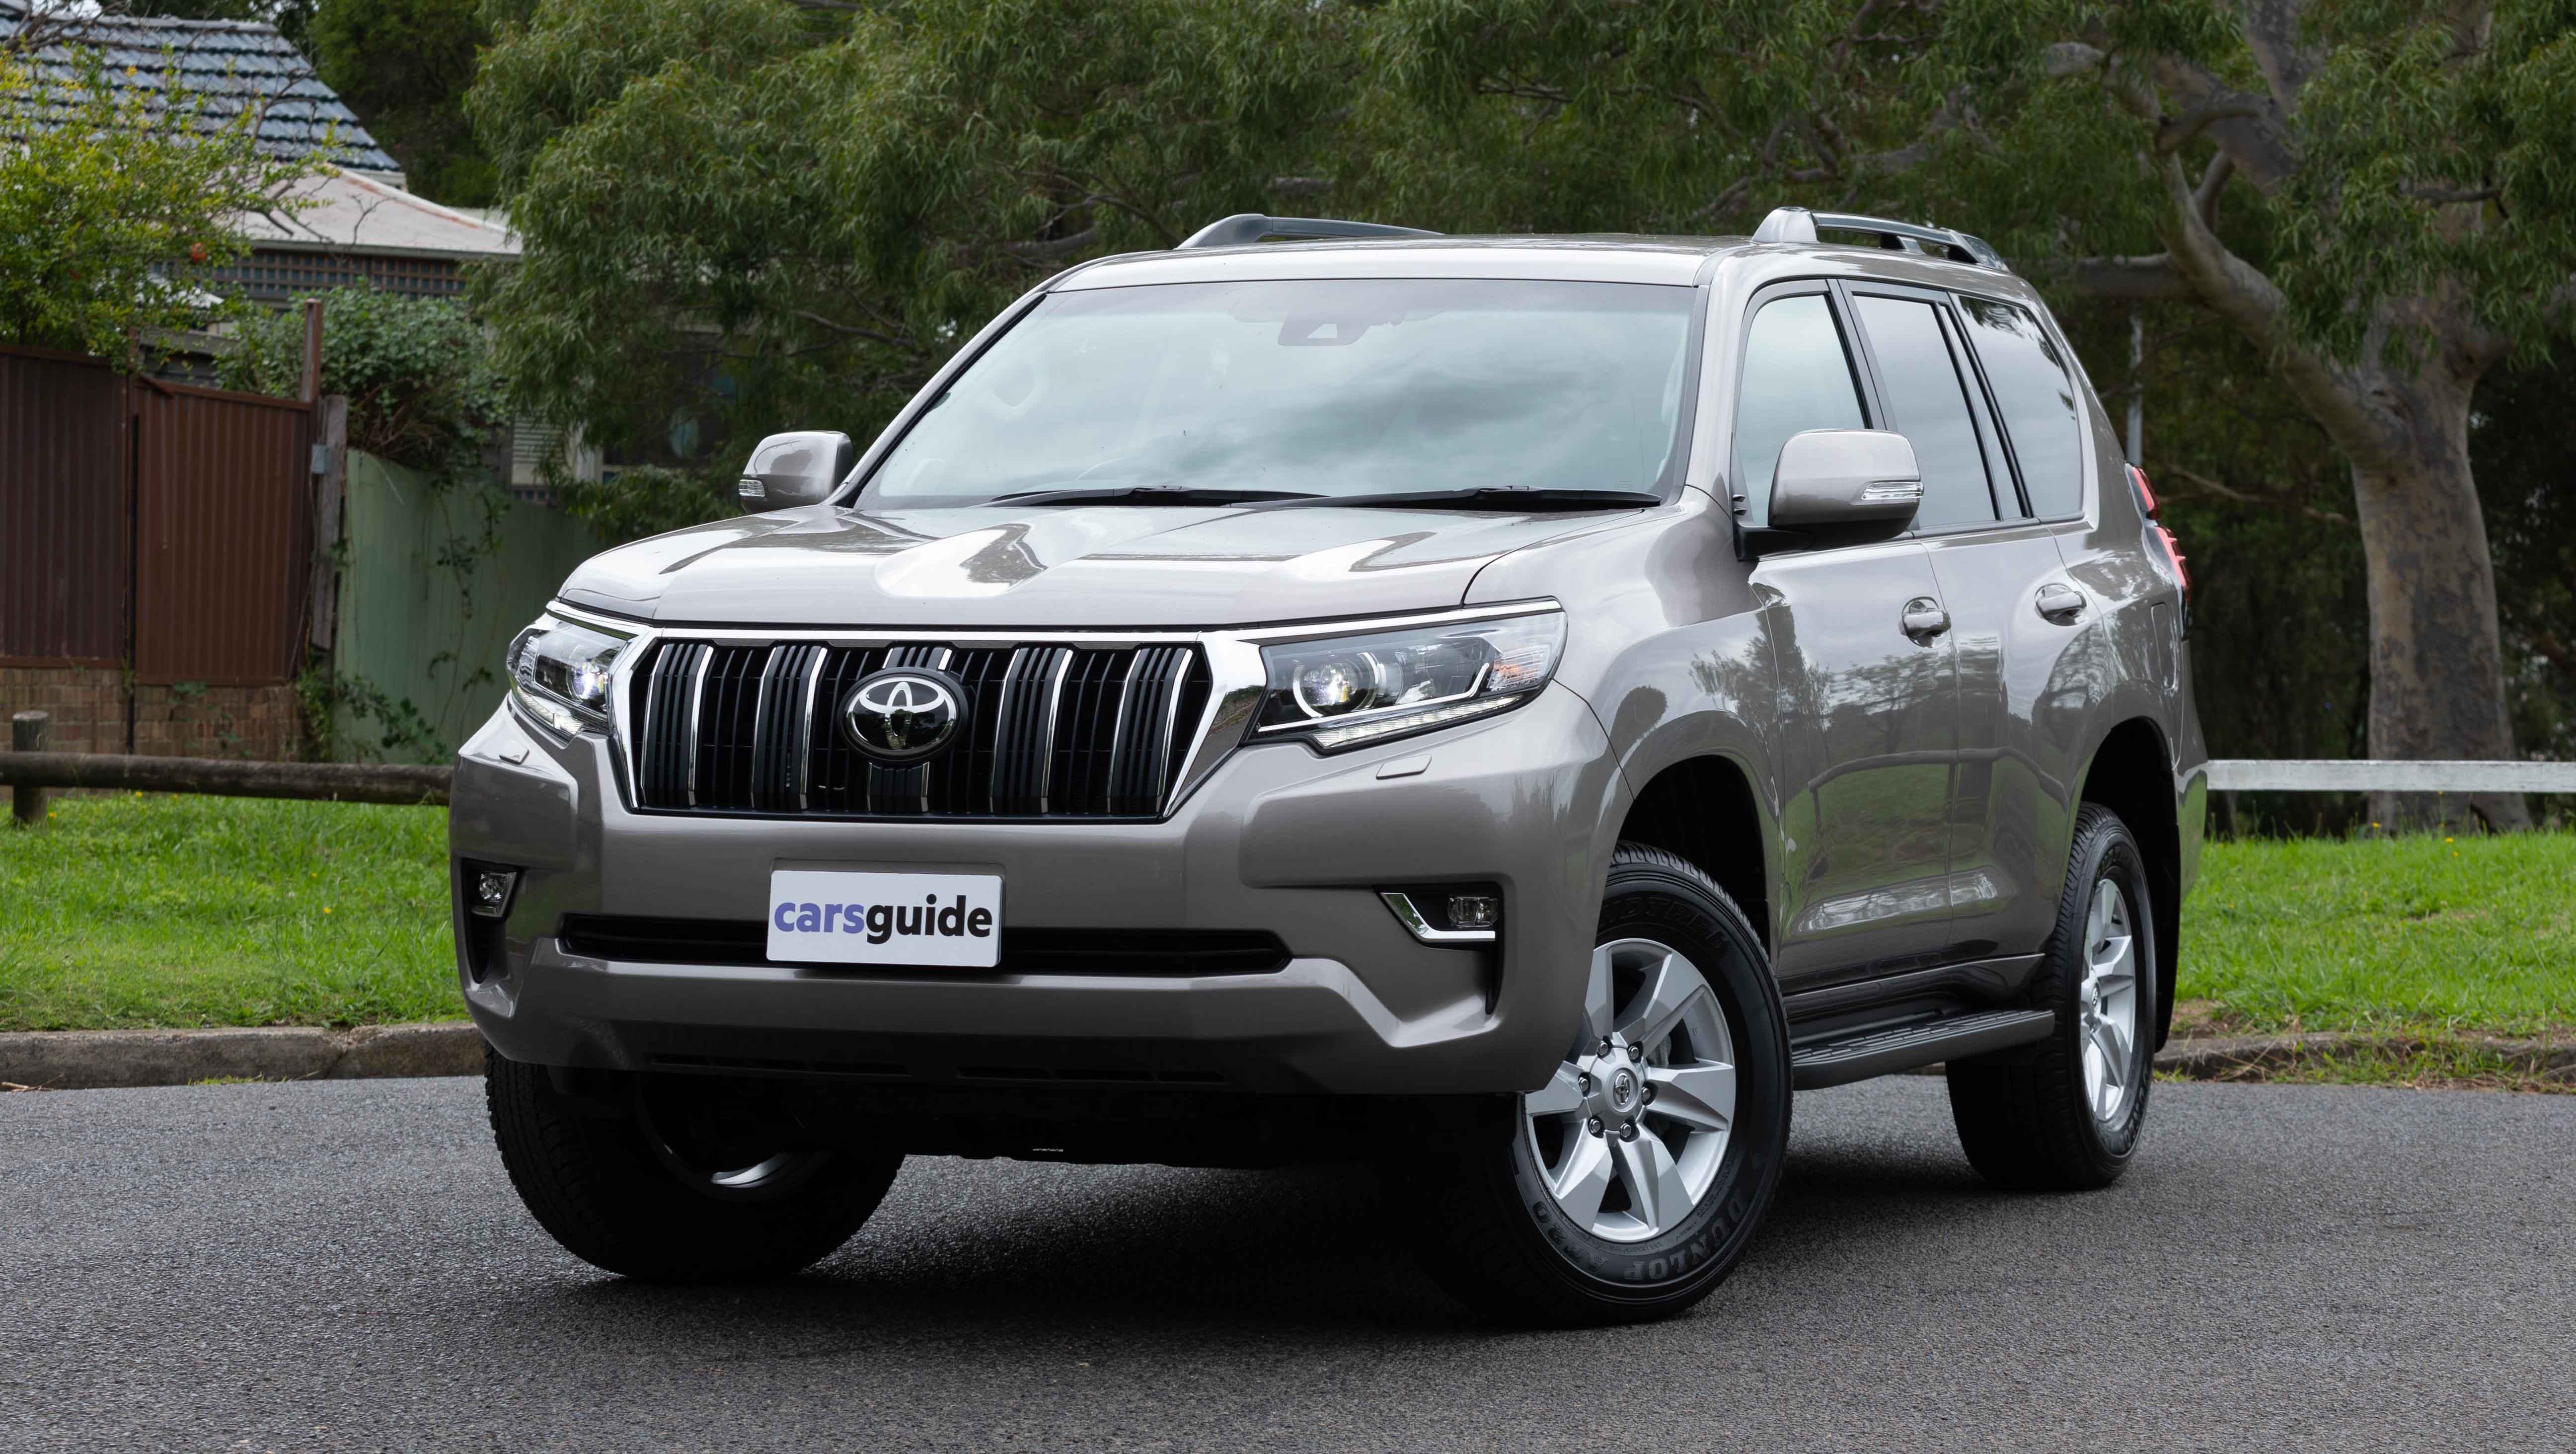 Toyota Prado 2021 review: GXL - Is the 7 seater mid-spec Land Cruiser